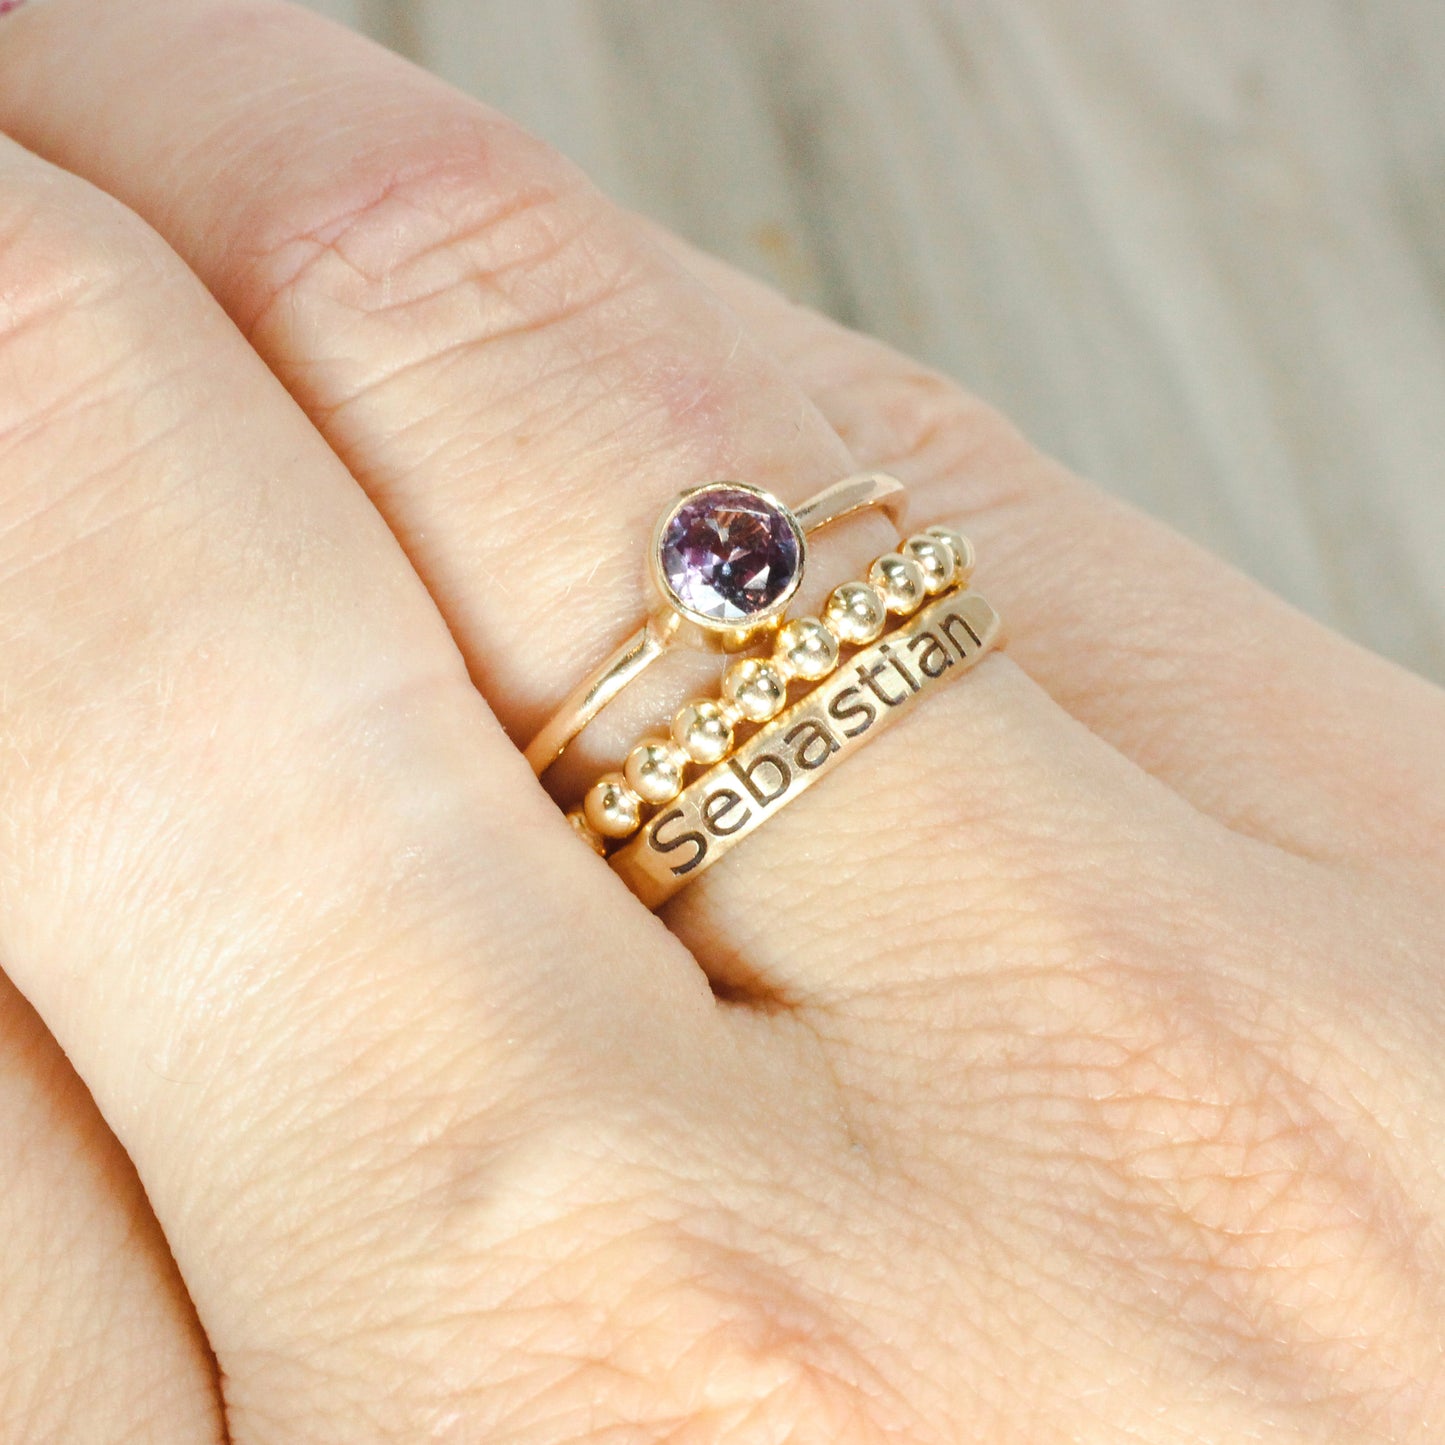 Sterling Silver Amethyst Stacking Ring // 5mm Faceted Gemstone February Birthstone Stackable Ring // Genuine Amethyst Ring